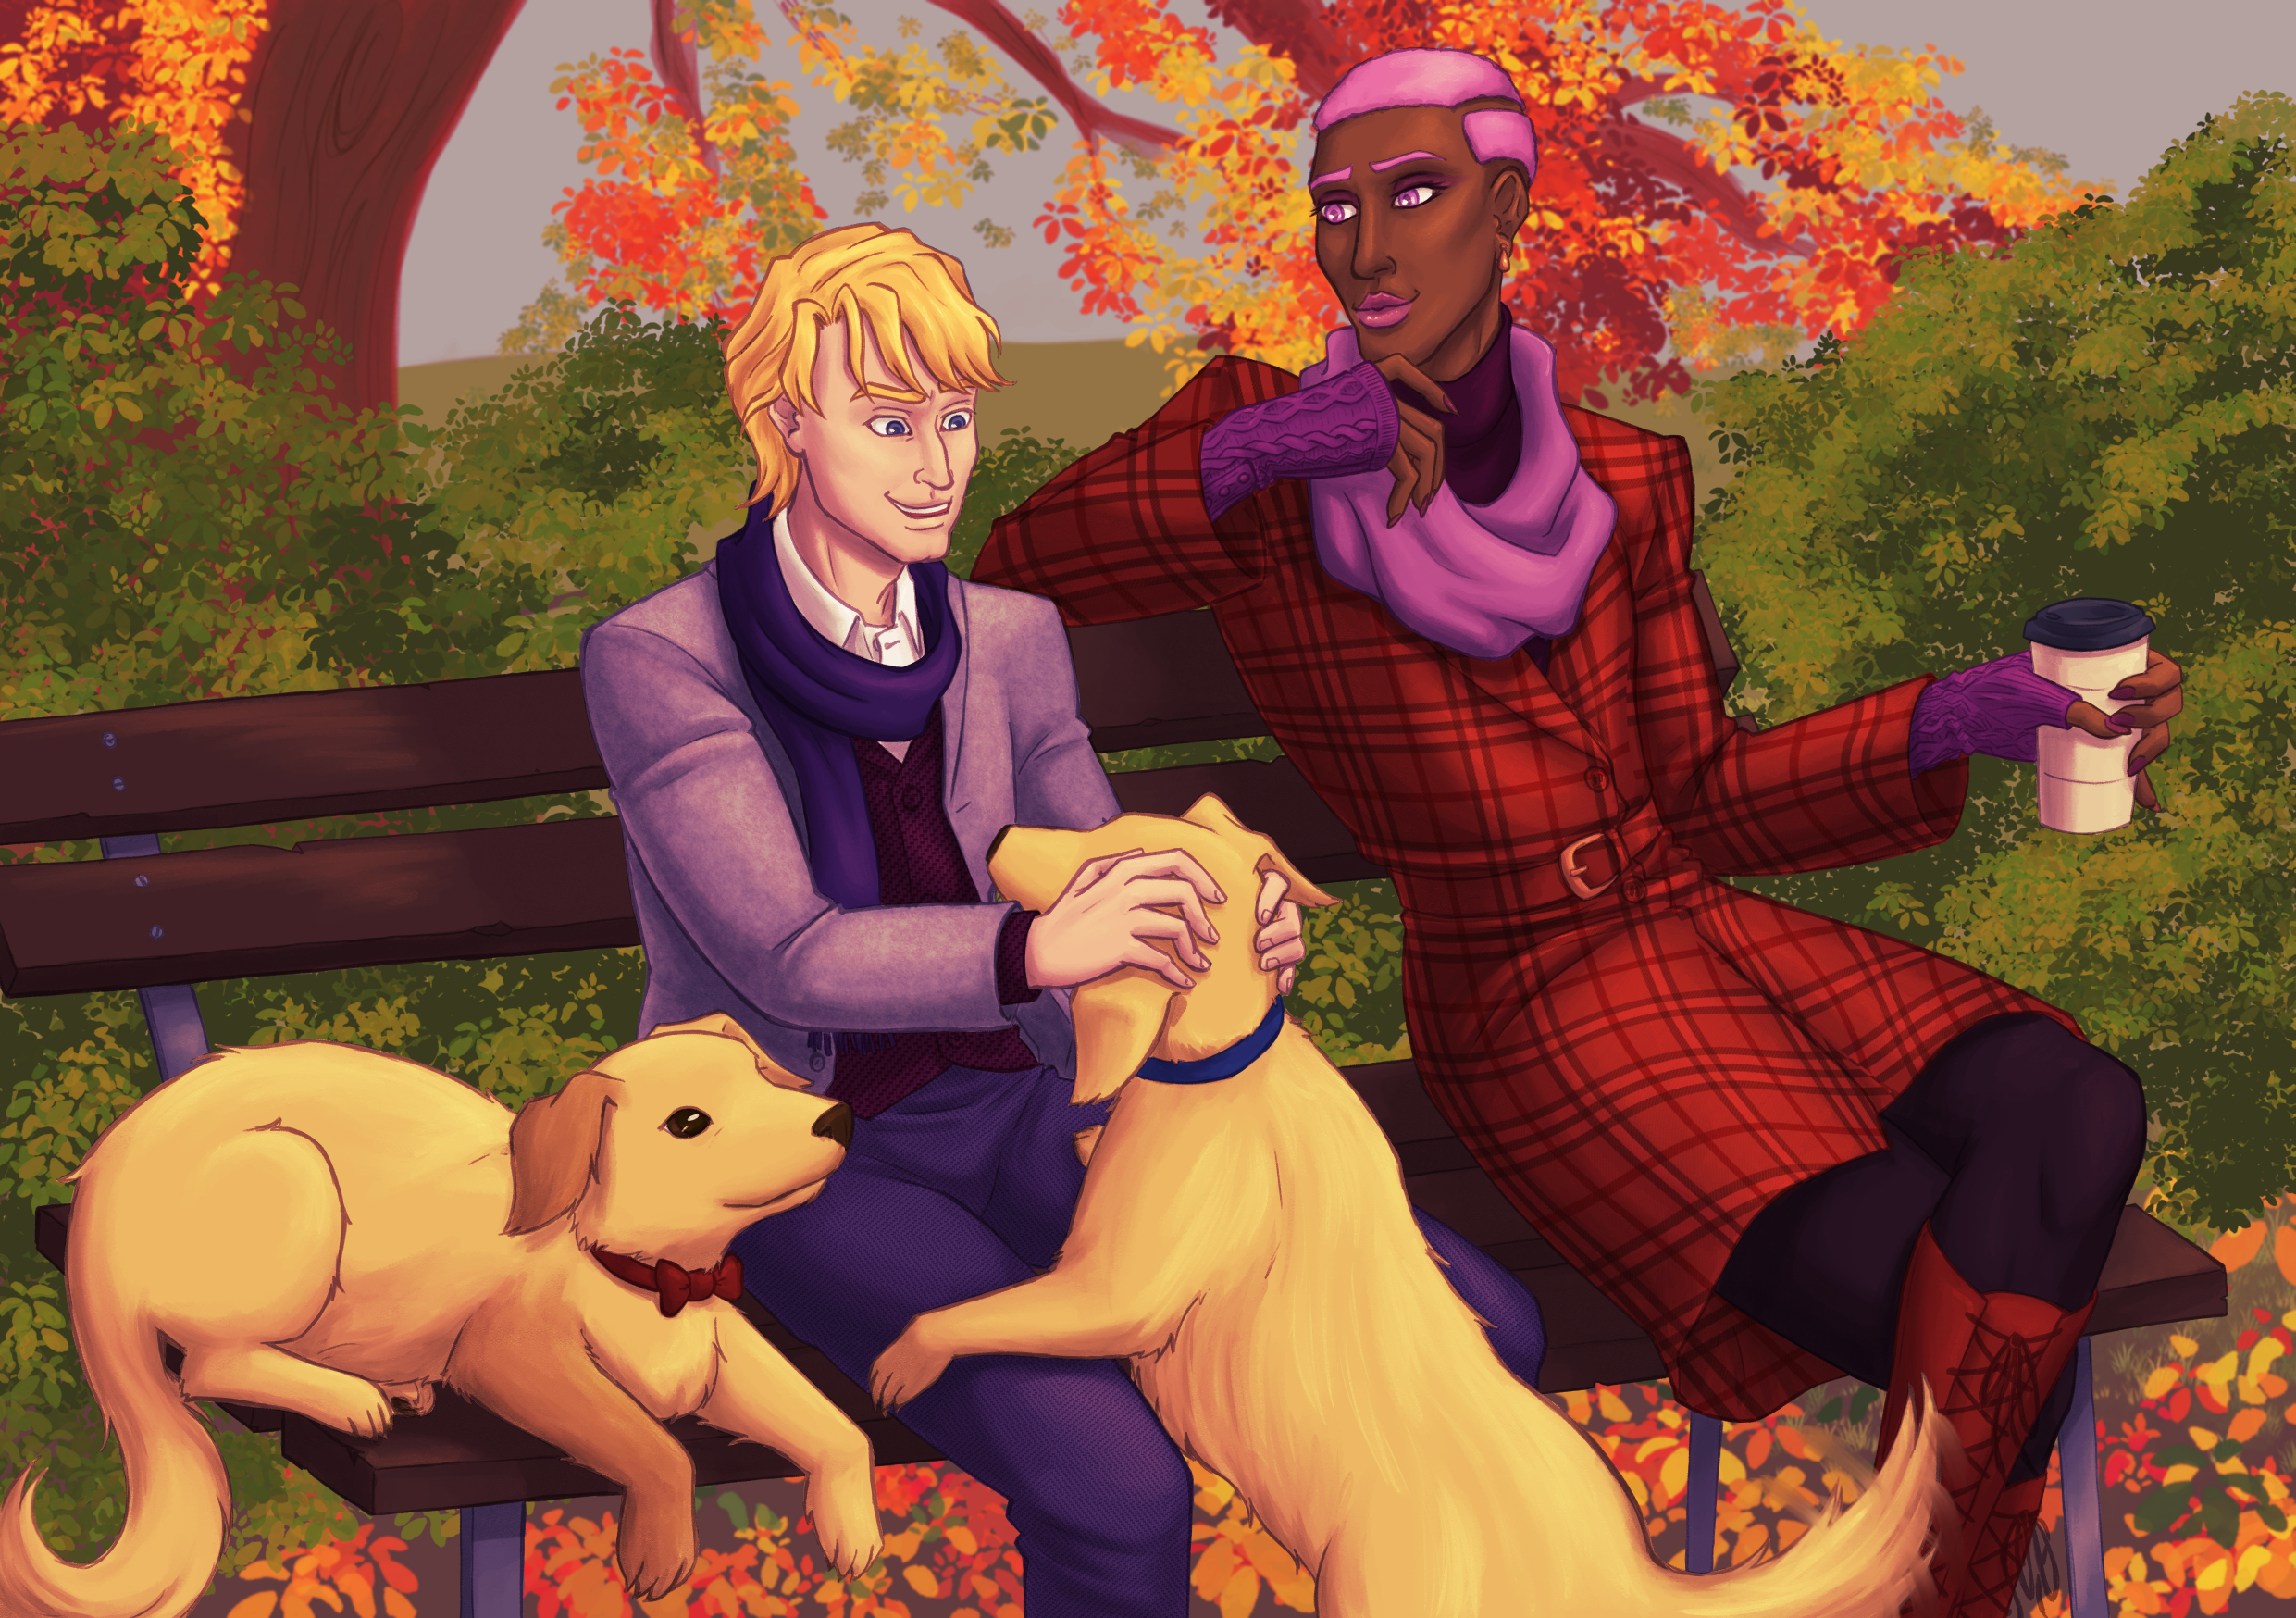 A piece of digital art showing the characters Keith Goodman and Nathan Seymour from the anime Tiger & Bunny. They are sitting on a park bench, dressed for cold weather. John the golden retriever sits on the bench next to them; Keith pets Johnjohn's ears. Nathan is holding a coffee cup and looking fondly at Keith.